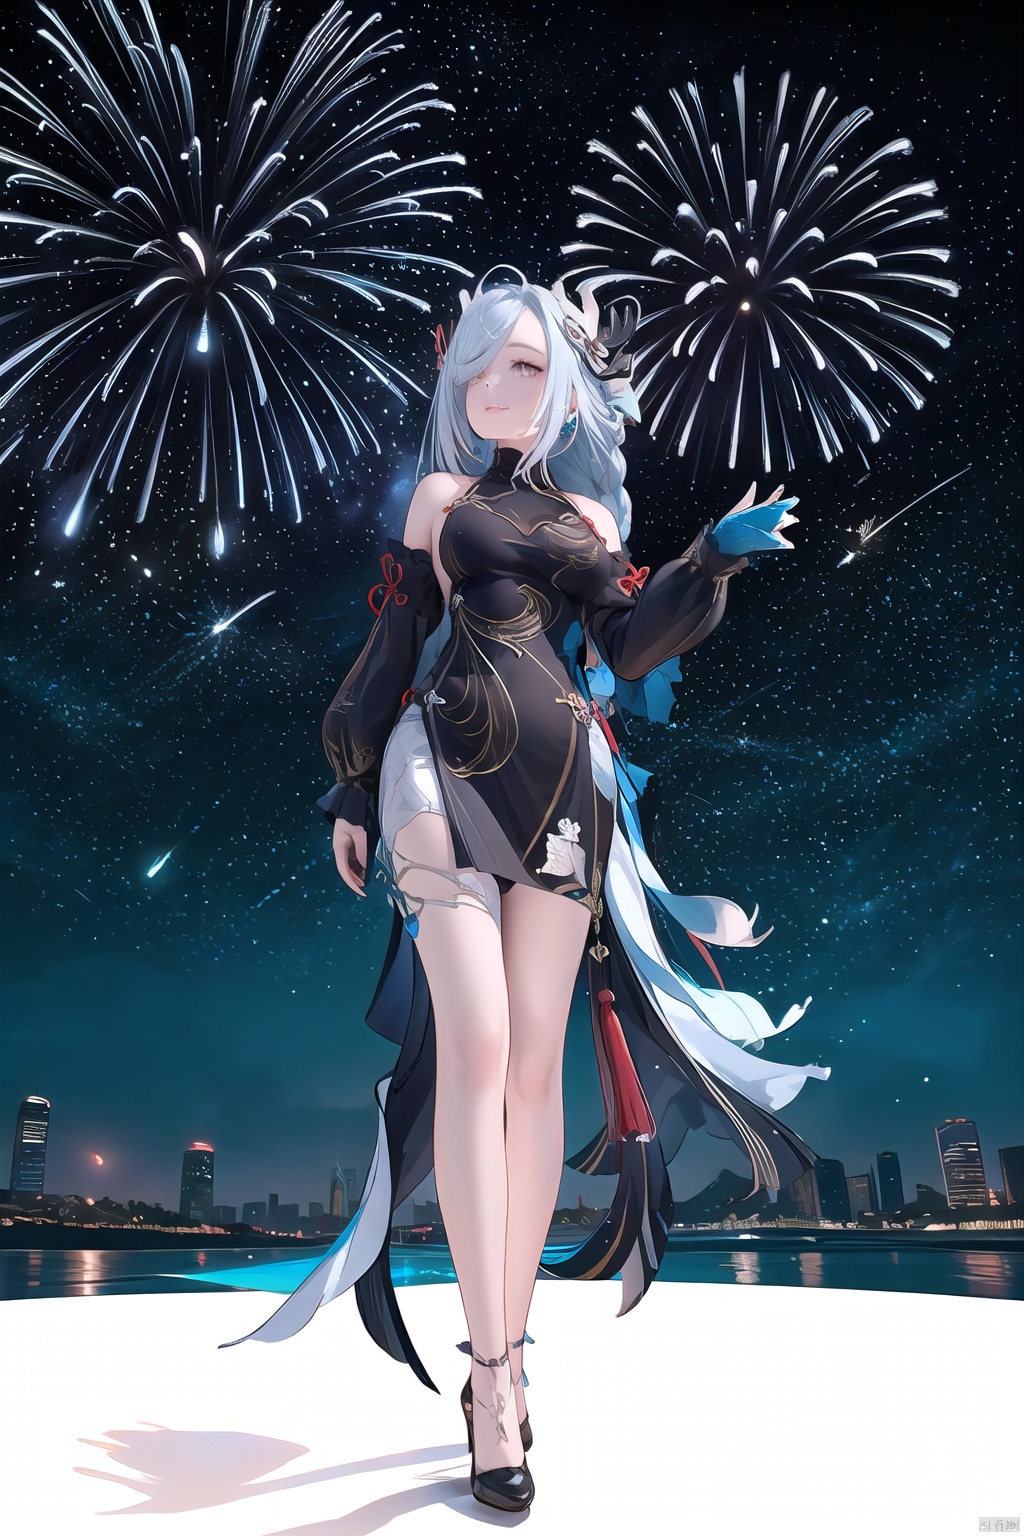 1 girl,  fireworks background, New Year, Fluorescent antlers, 2024 Year,from below,number background, 
\\\\\\\\\\\\\\\\\\\\\\\\\\
1gril,fullbody, on other colors. The headgear should be depicted in a stylized, modern form. The illustration should be flat and minimalist, with a white background to emphasize the character's whimsical side profile and headgear, resonating with the geometric aesthetic we established earlier.
\\\\\\\\\\\\\\\\\\\\\
(hdshenhe:1.2),shenhe \(genshin impact\),qipao,chinese dress,hair over one eye,long hair,hair ornament,long_sleeves,long_dress,